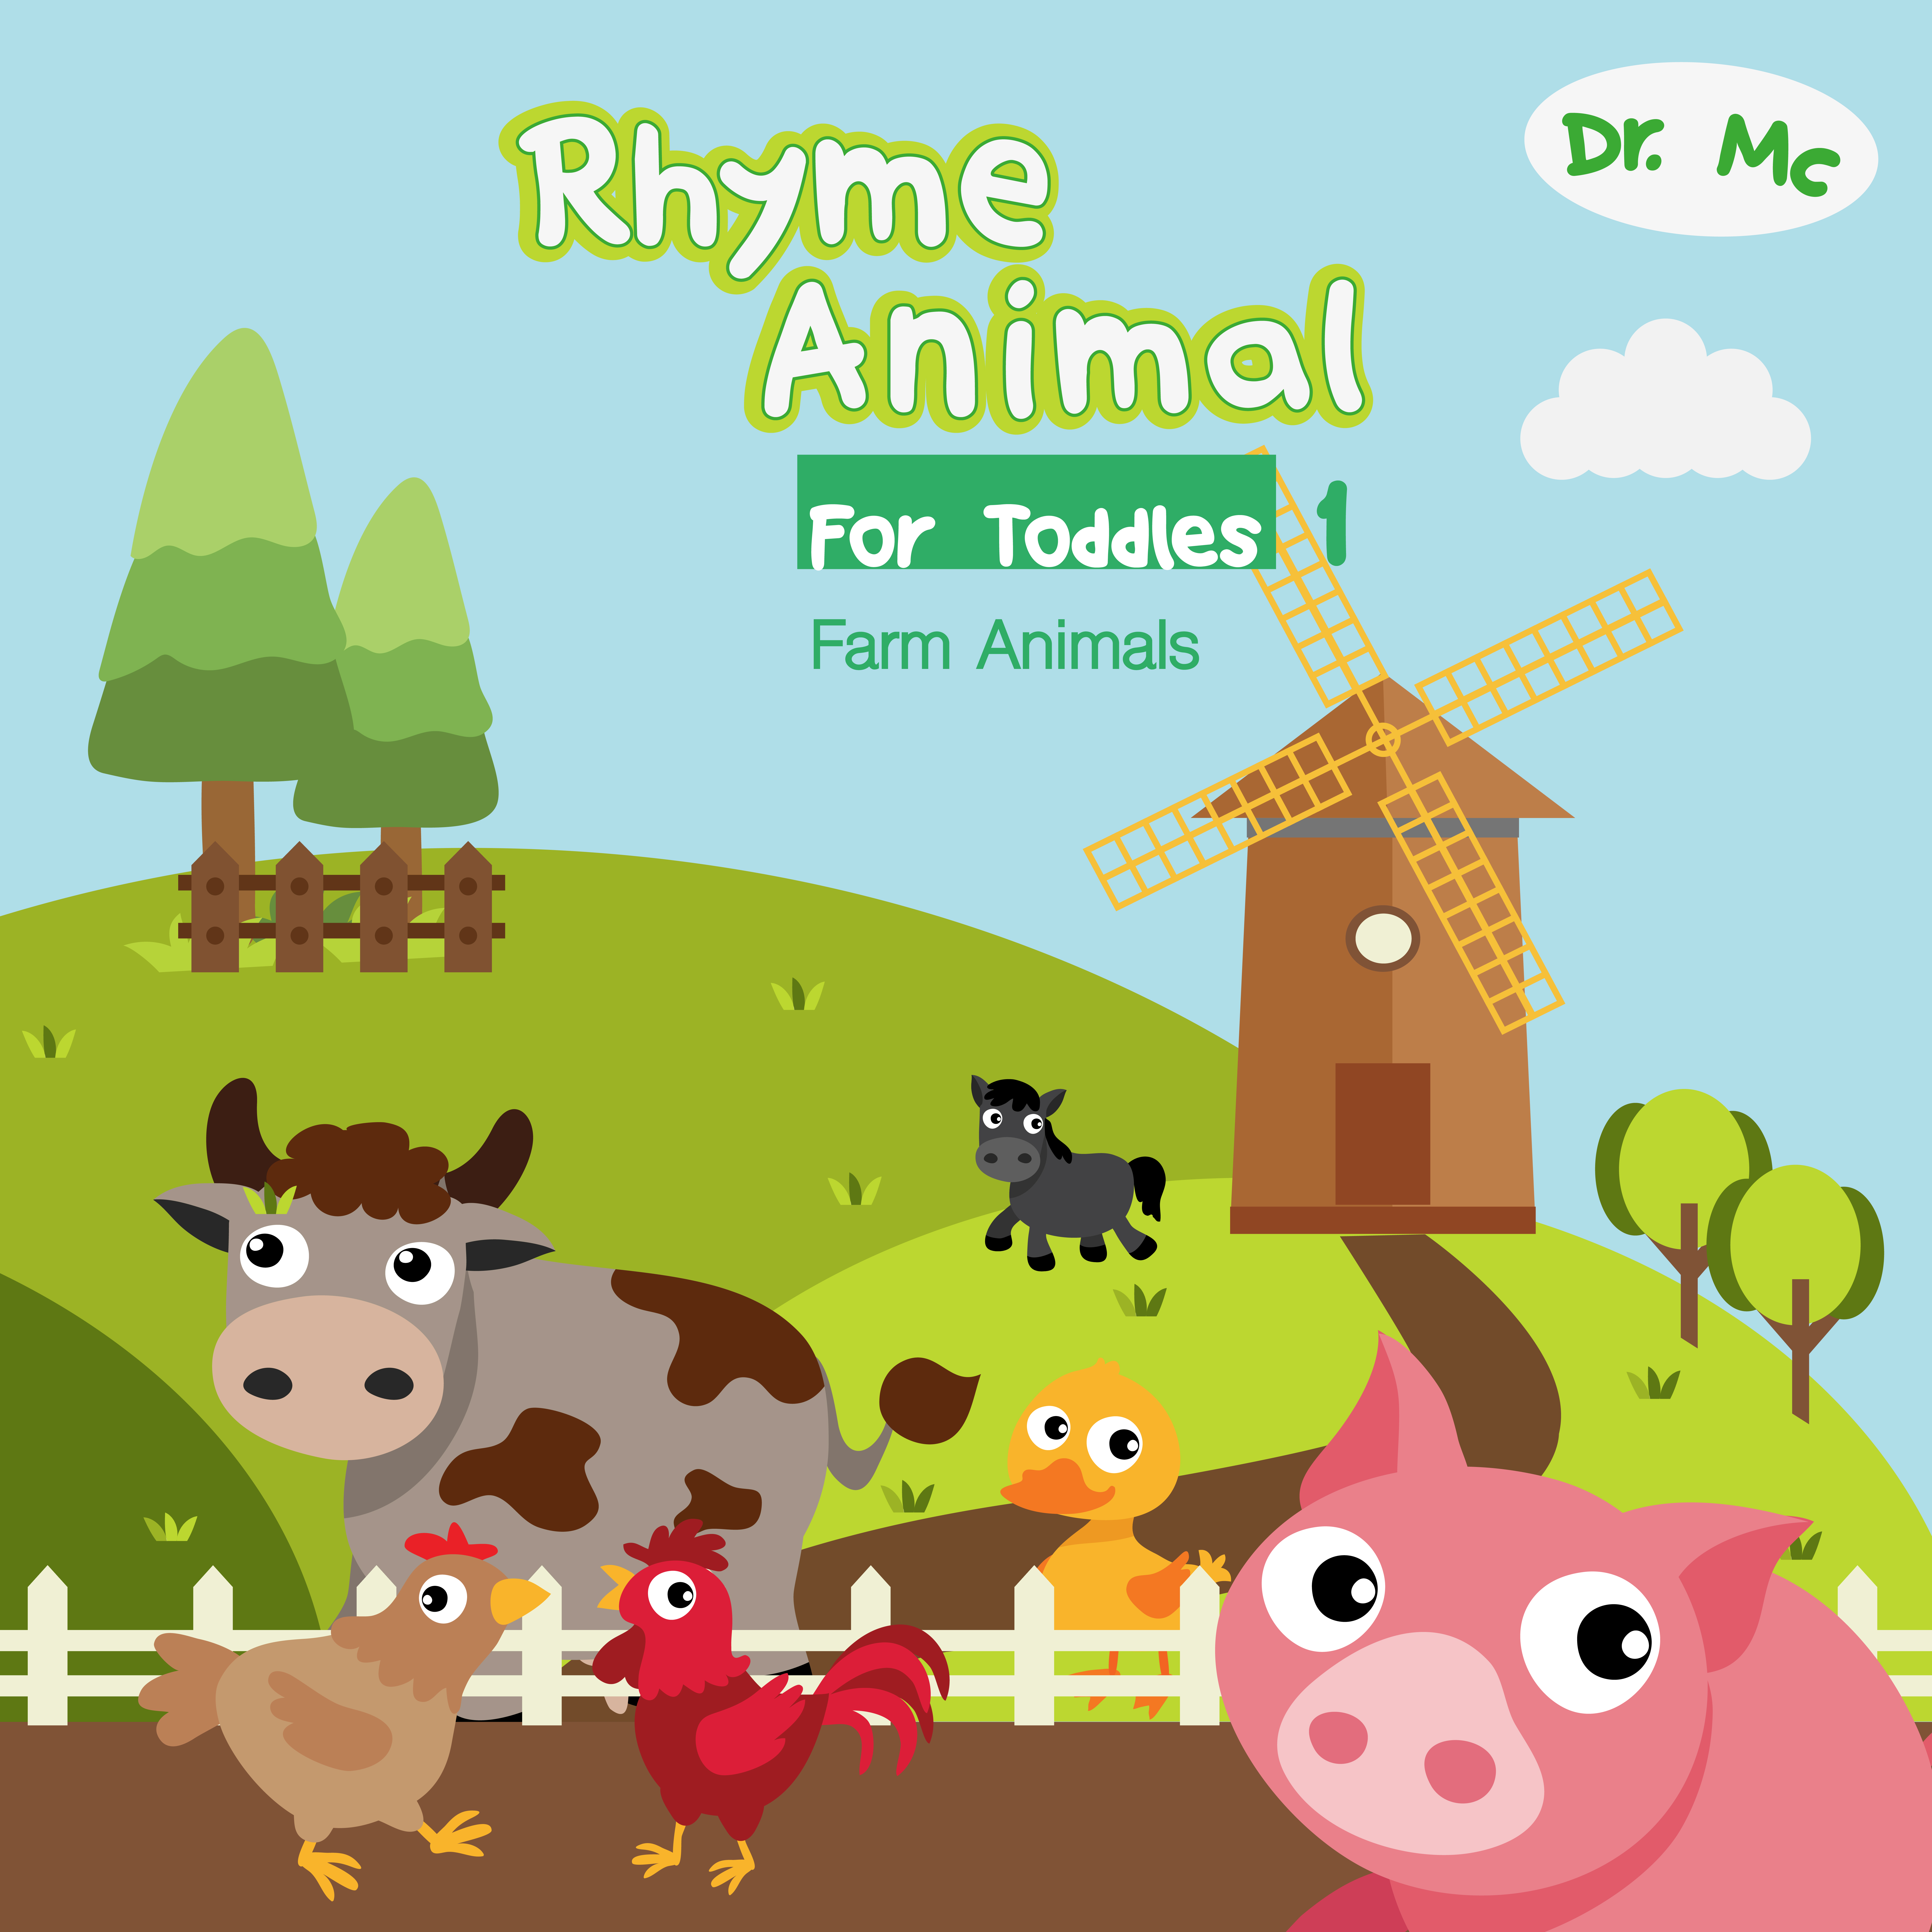 Smashwords – Rhyme Animal For Toddles 1 Farm Animals Childrens Books Ages  1-3 Farm Animals The Ryhme Animal Children's book 1 – a book by Dr. MC